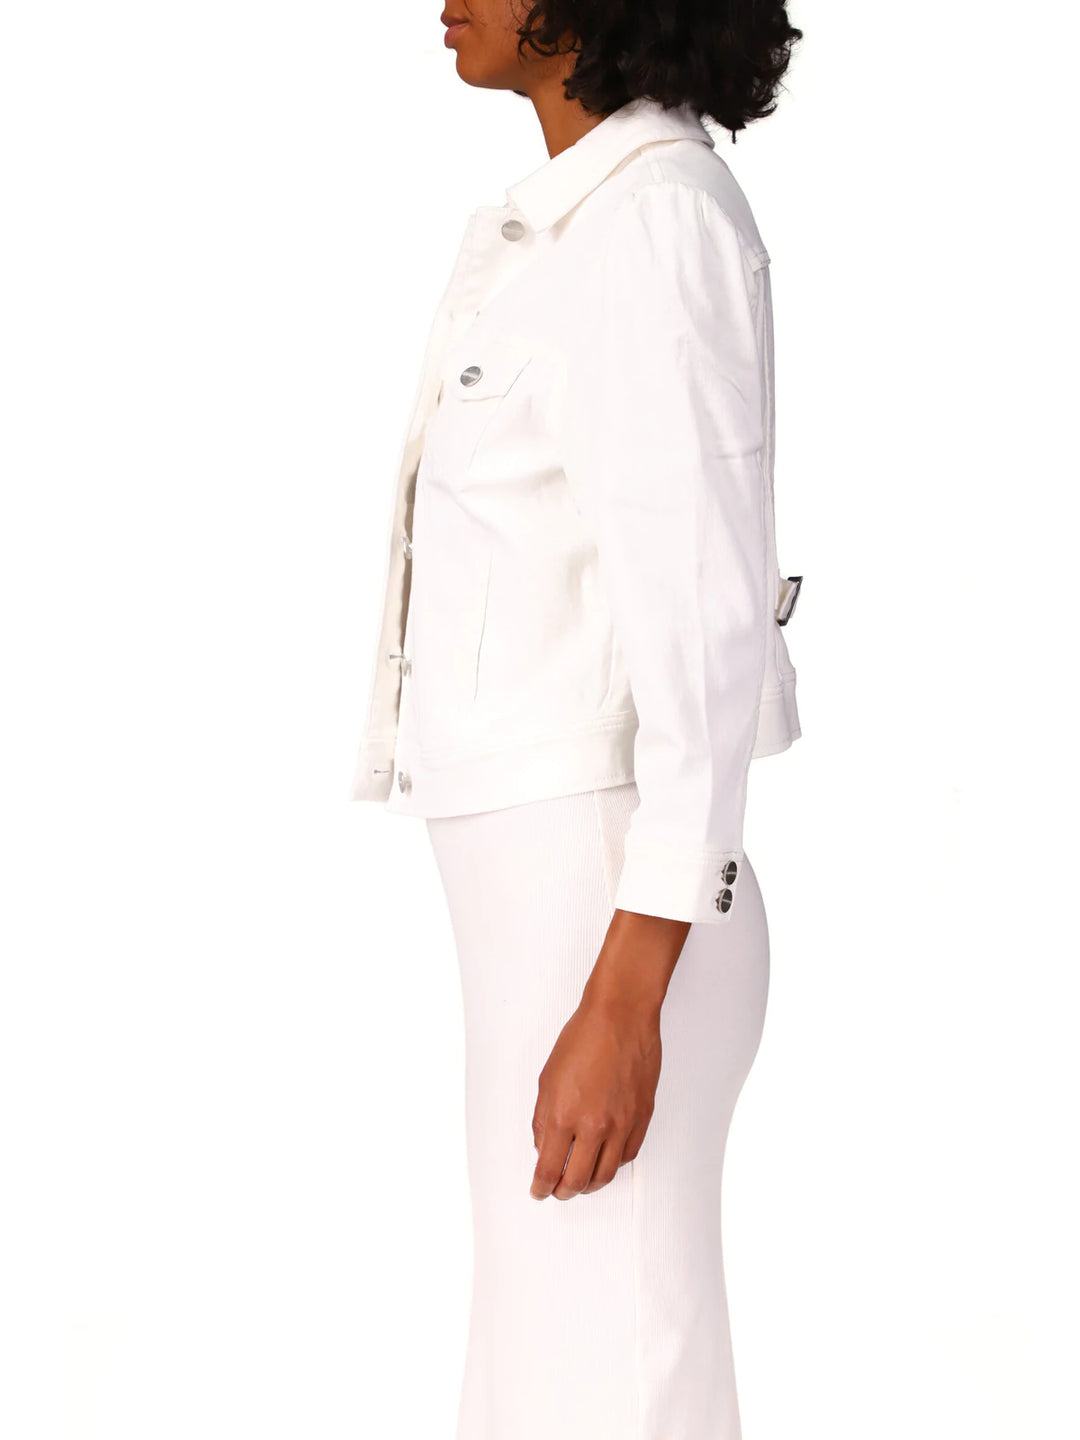 SASSY FITTED JEAN JACKET (WHITE) - SANCTUARY